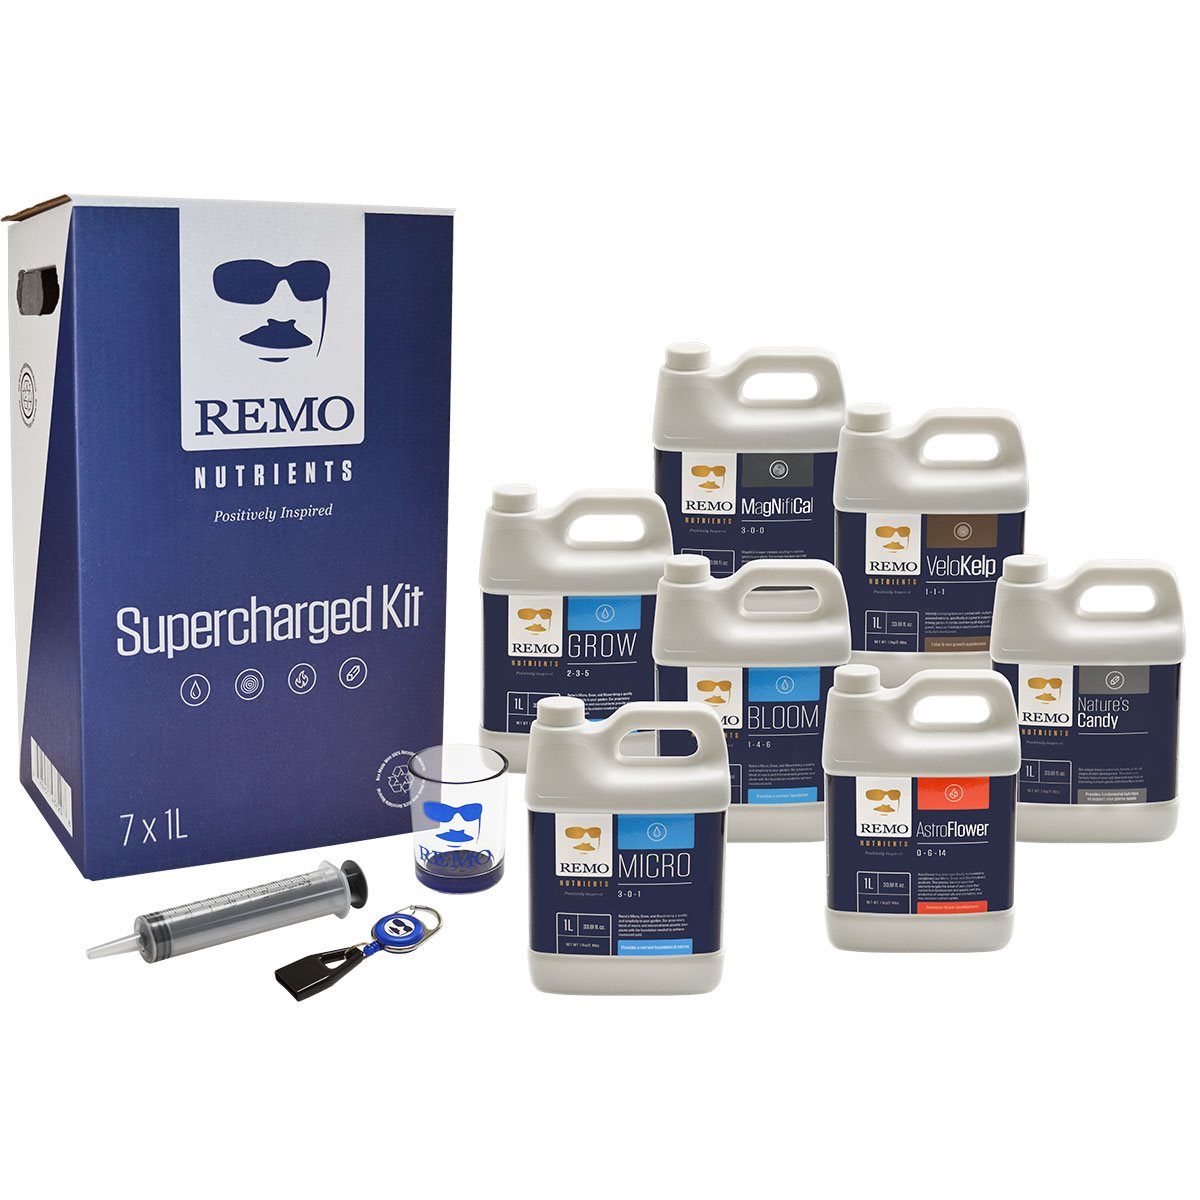 Remo Nutrients Supercharged Kits